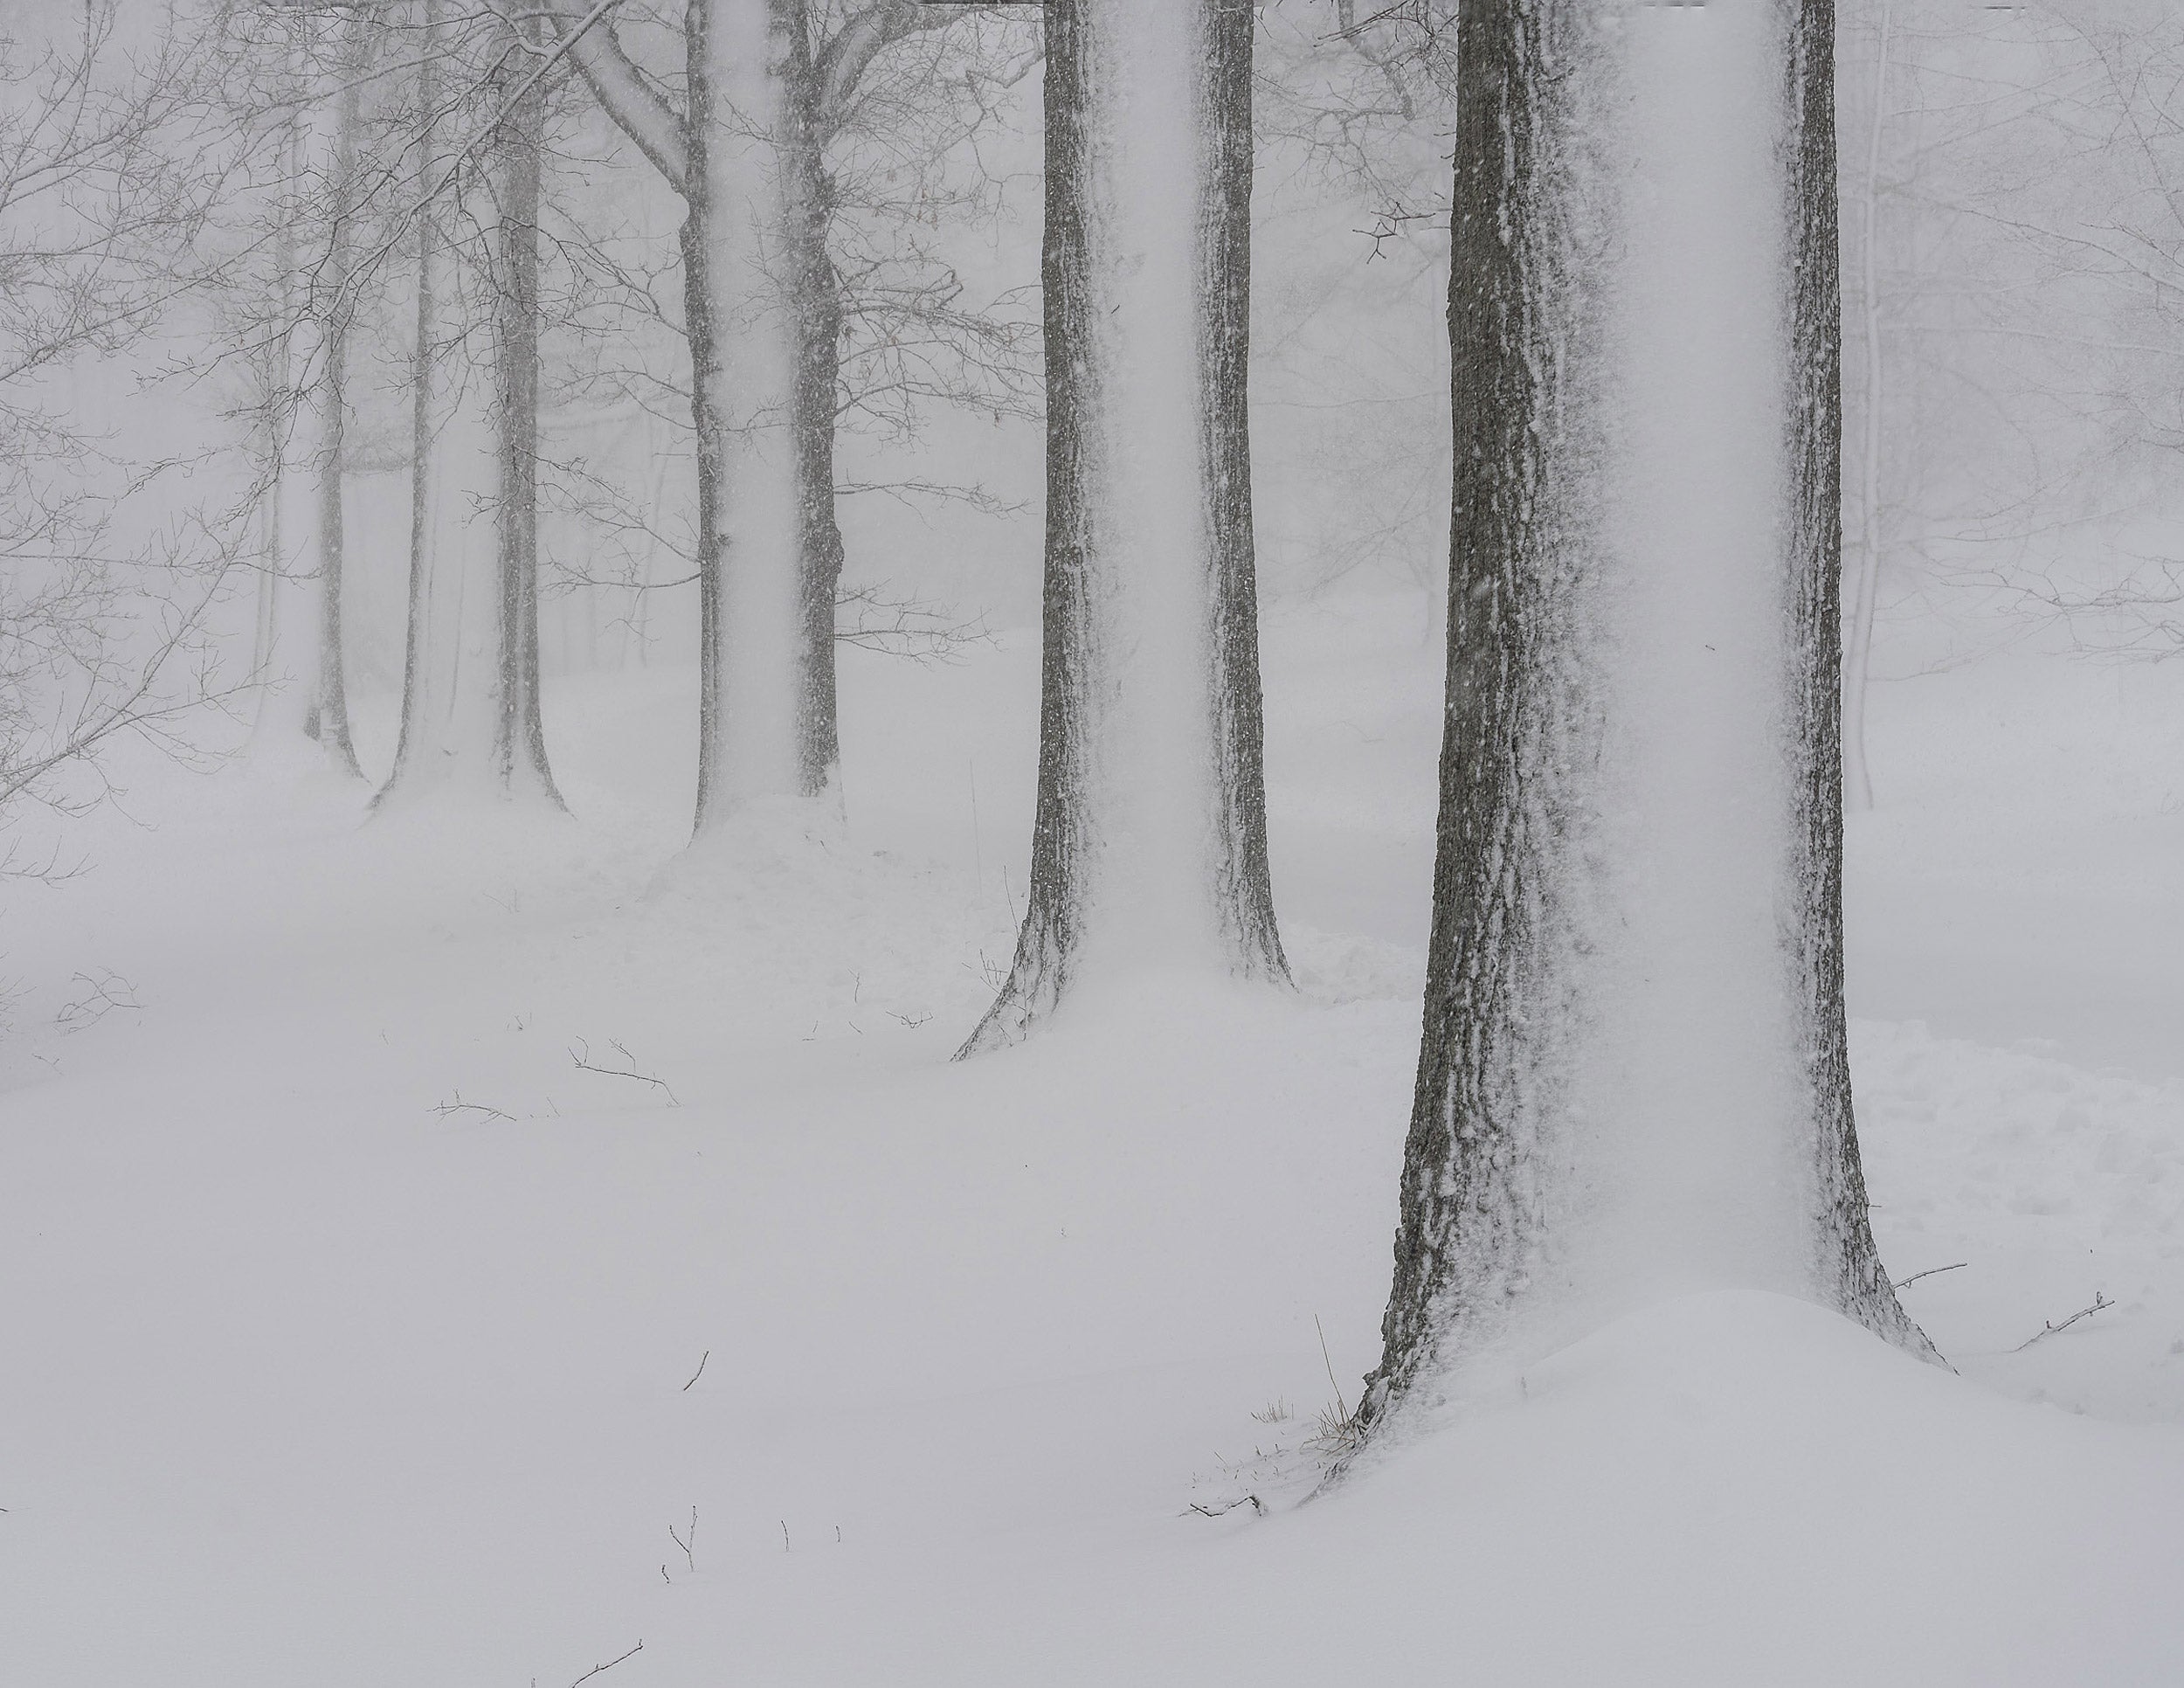 Line of trees during blizzard.